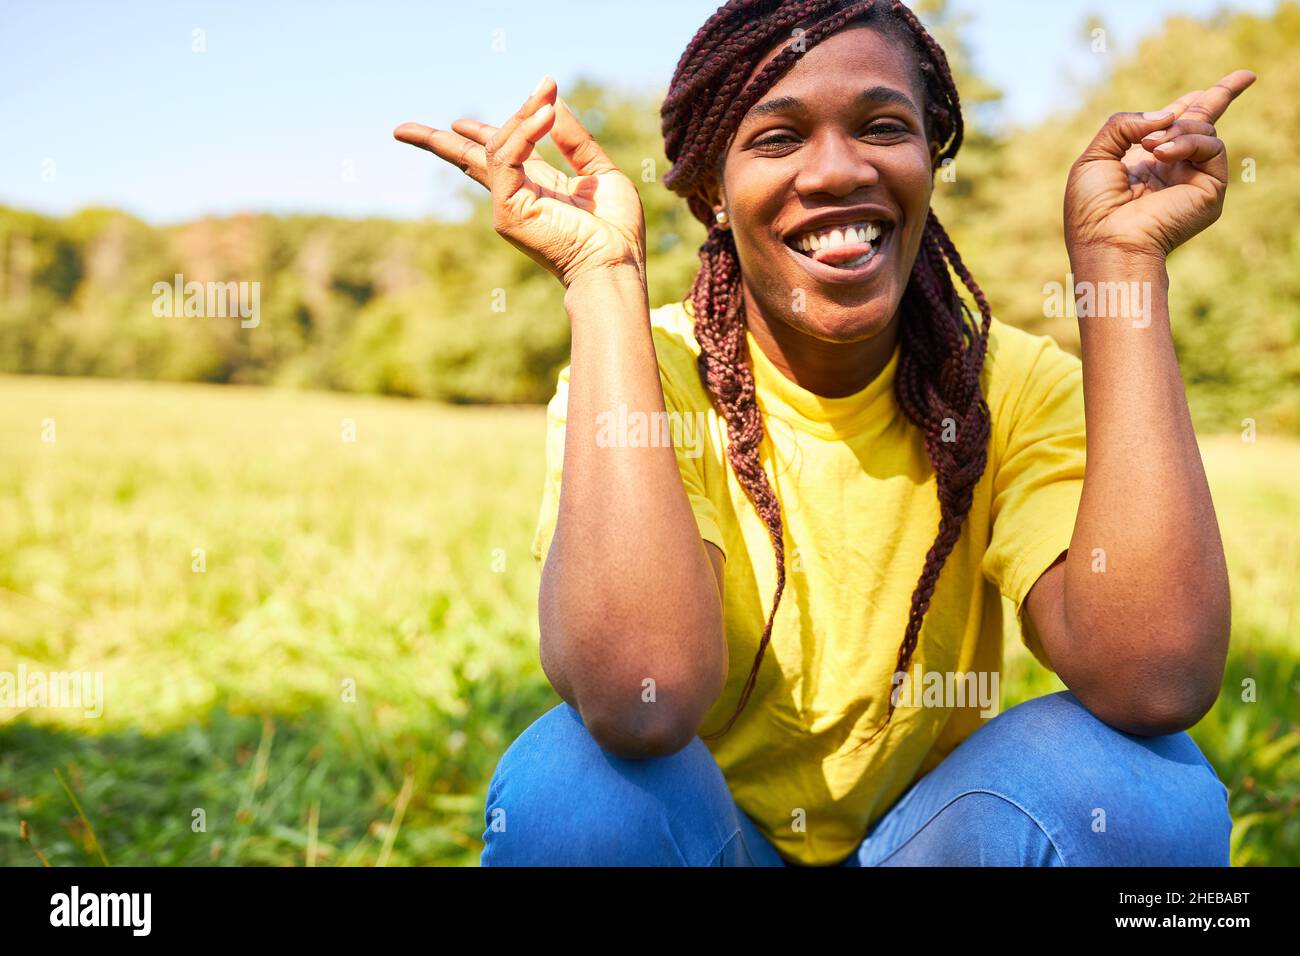 Confident young woman with Rasta braids on a meadow in summer with cool gestures Stock Photo